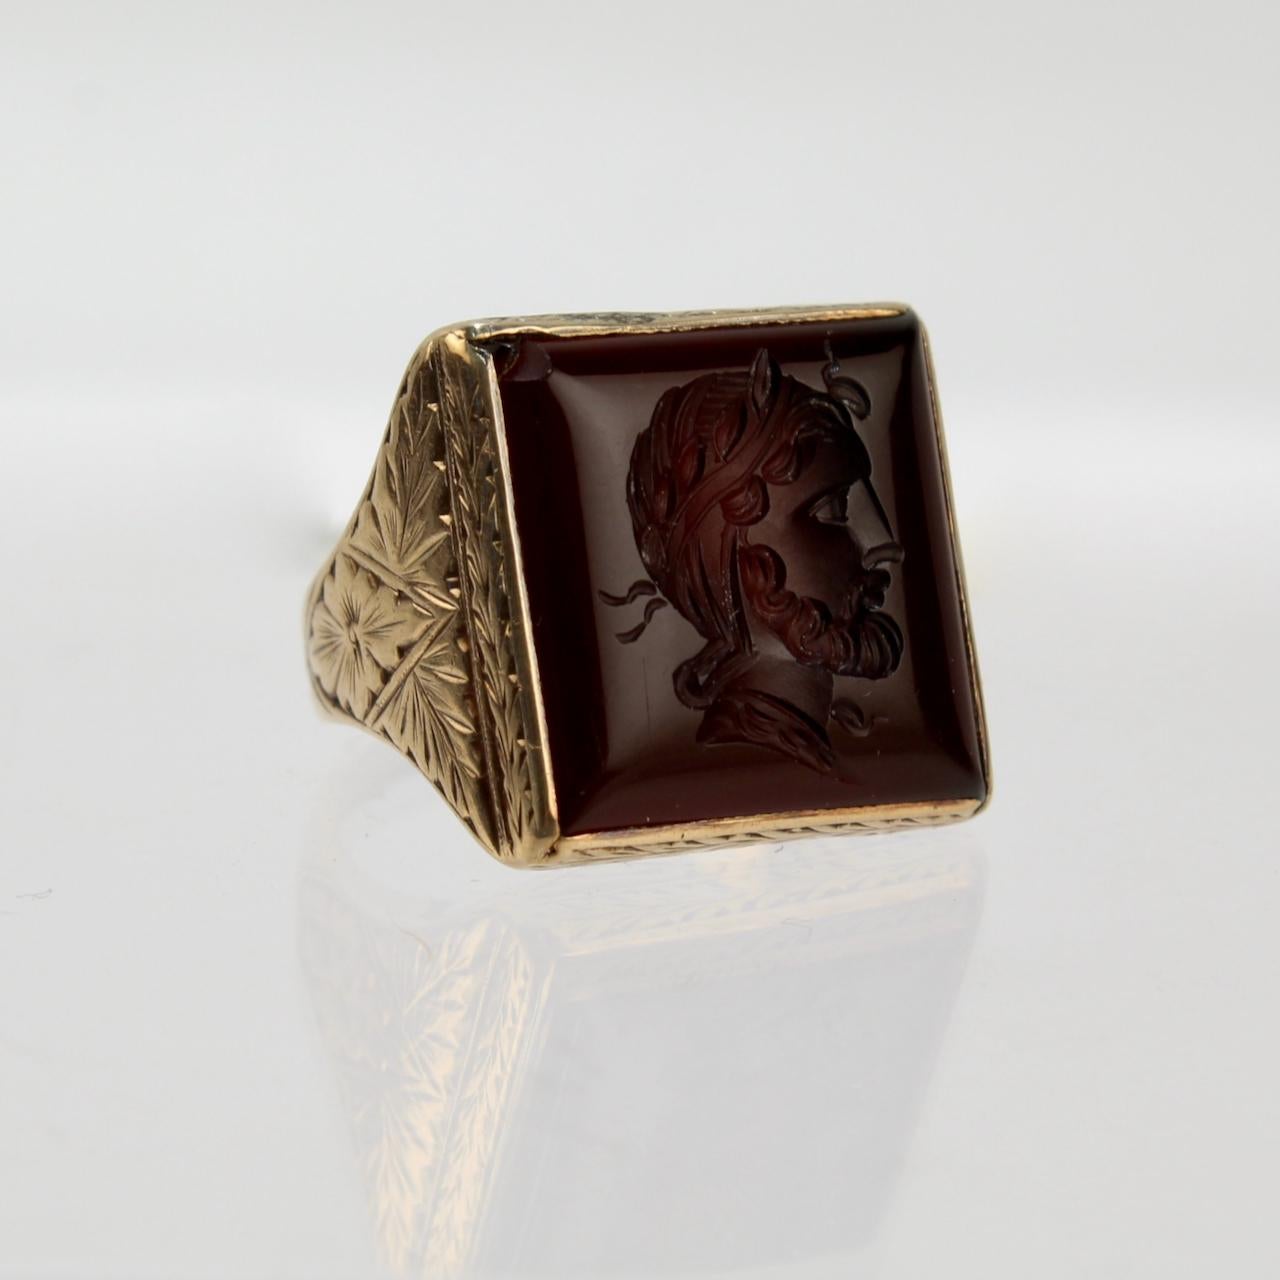 14 Karat Gold Carved Carnelian Intaglio Signet Ring with a Roman Bust 6